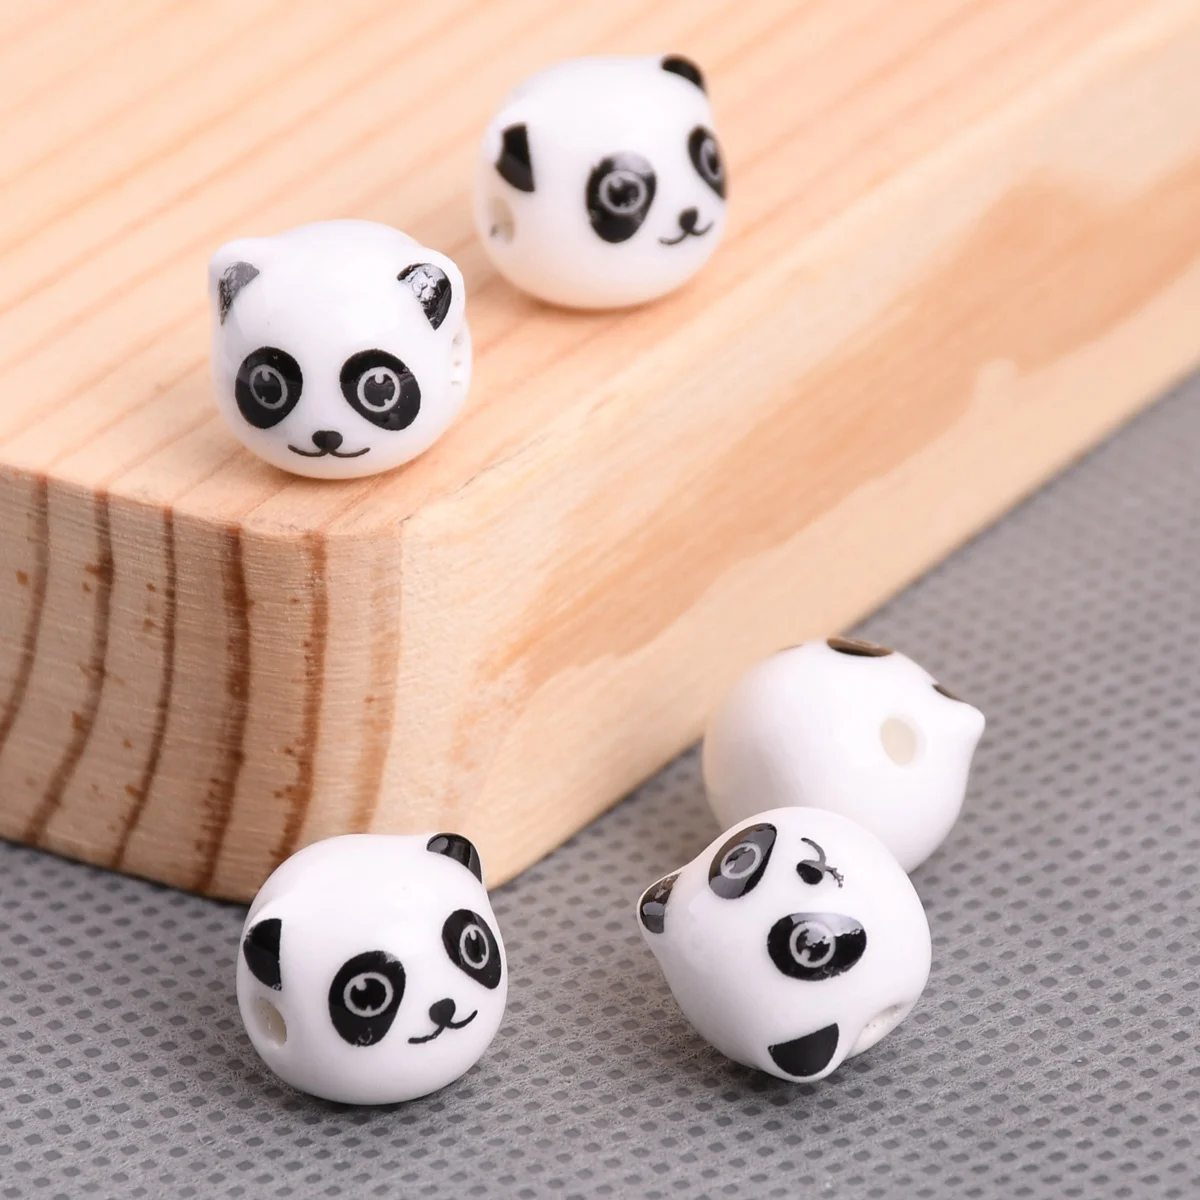 10pcs Panda Head 11mm Handmade Ceramic Porcelain Loose Beads For Jewelry Making DIY Bracelet Findings sewacc jewelry tray painting supplies ceramic palette 5 layers porcelain watercolor palette mixing trays set paint tray